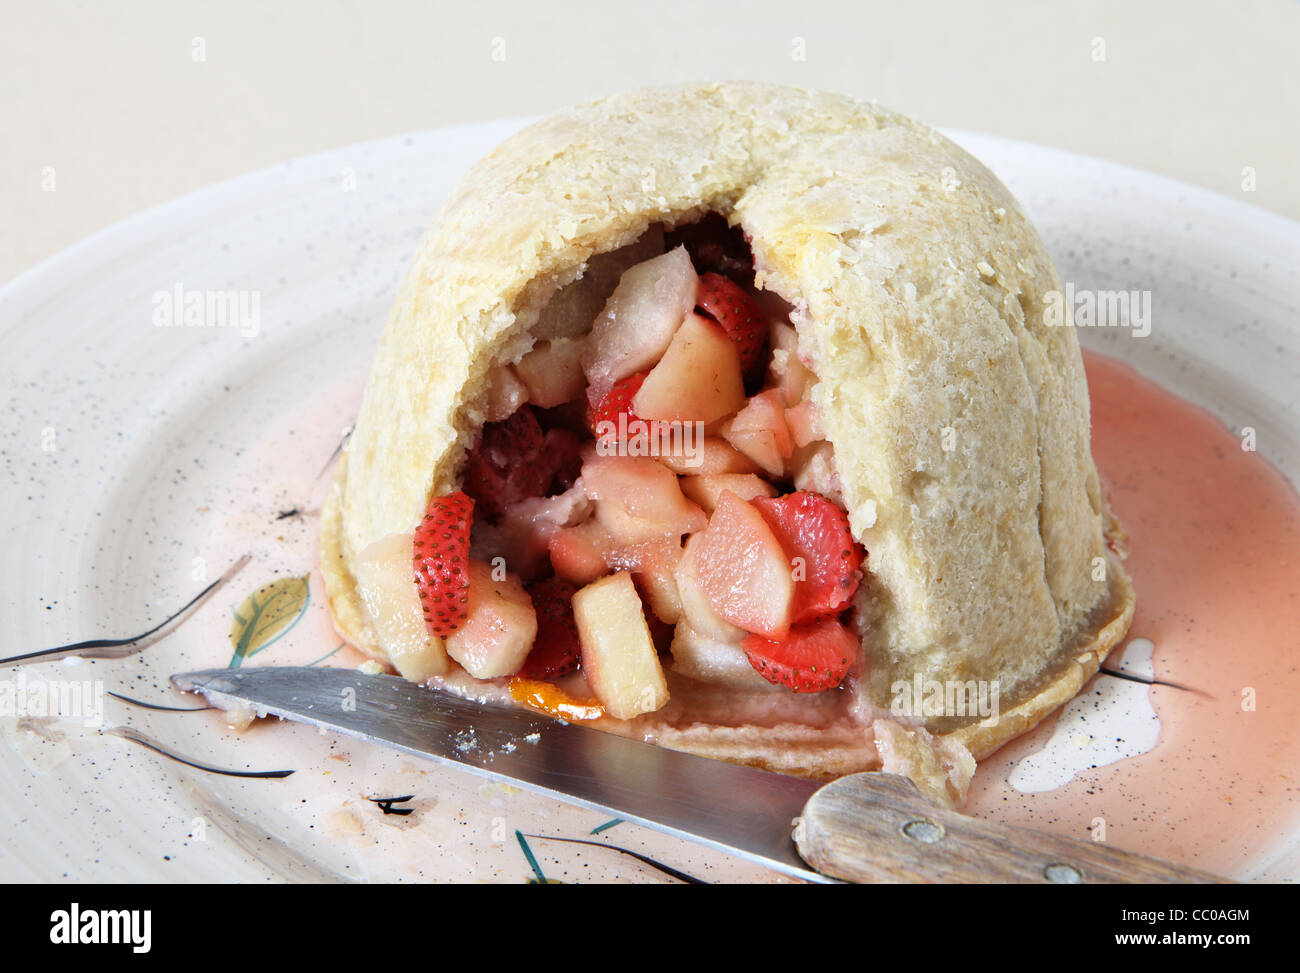 A traditional british steamed strawberry and pear fruit pudding on a serving dish, cut open, with the kitchen knife Stock Photo